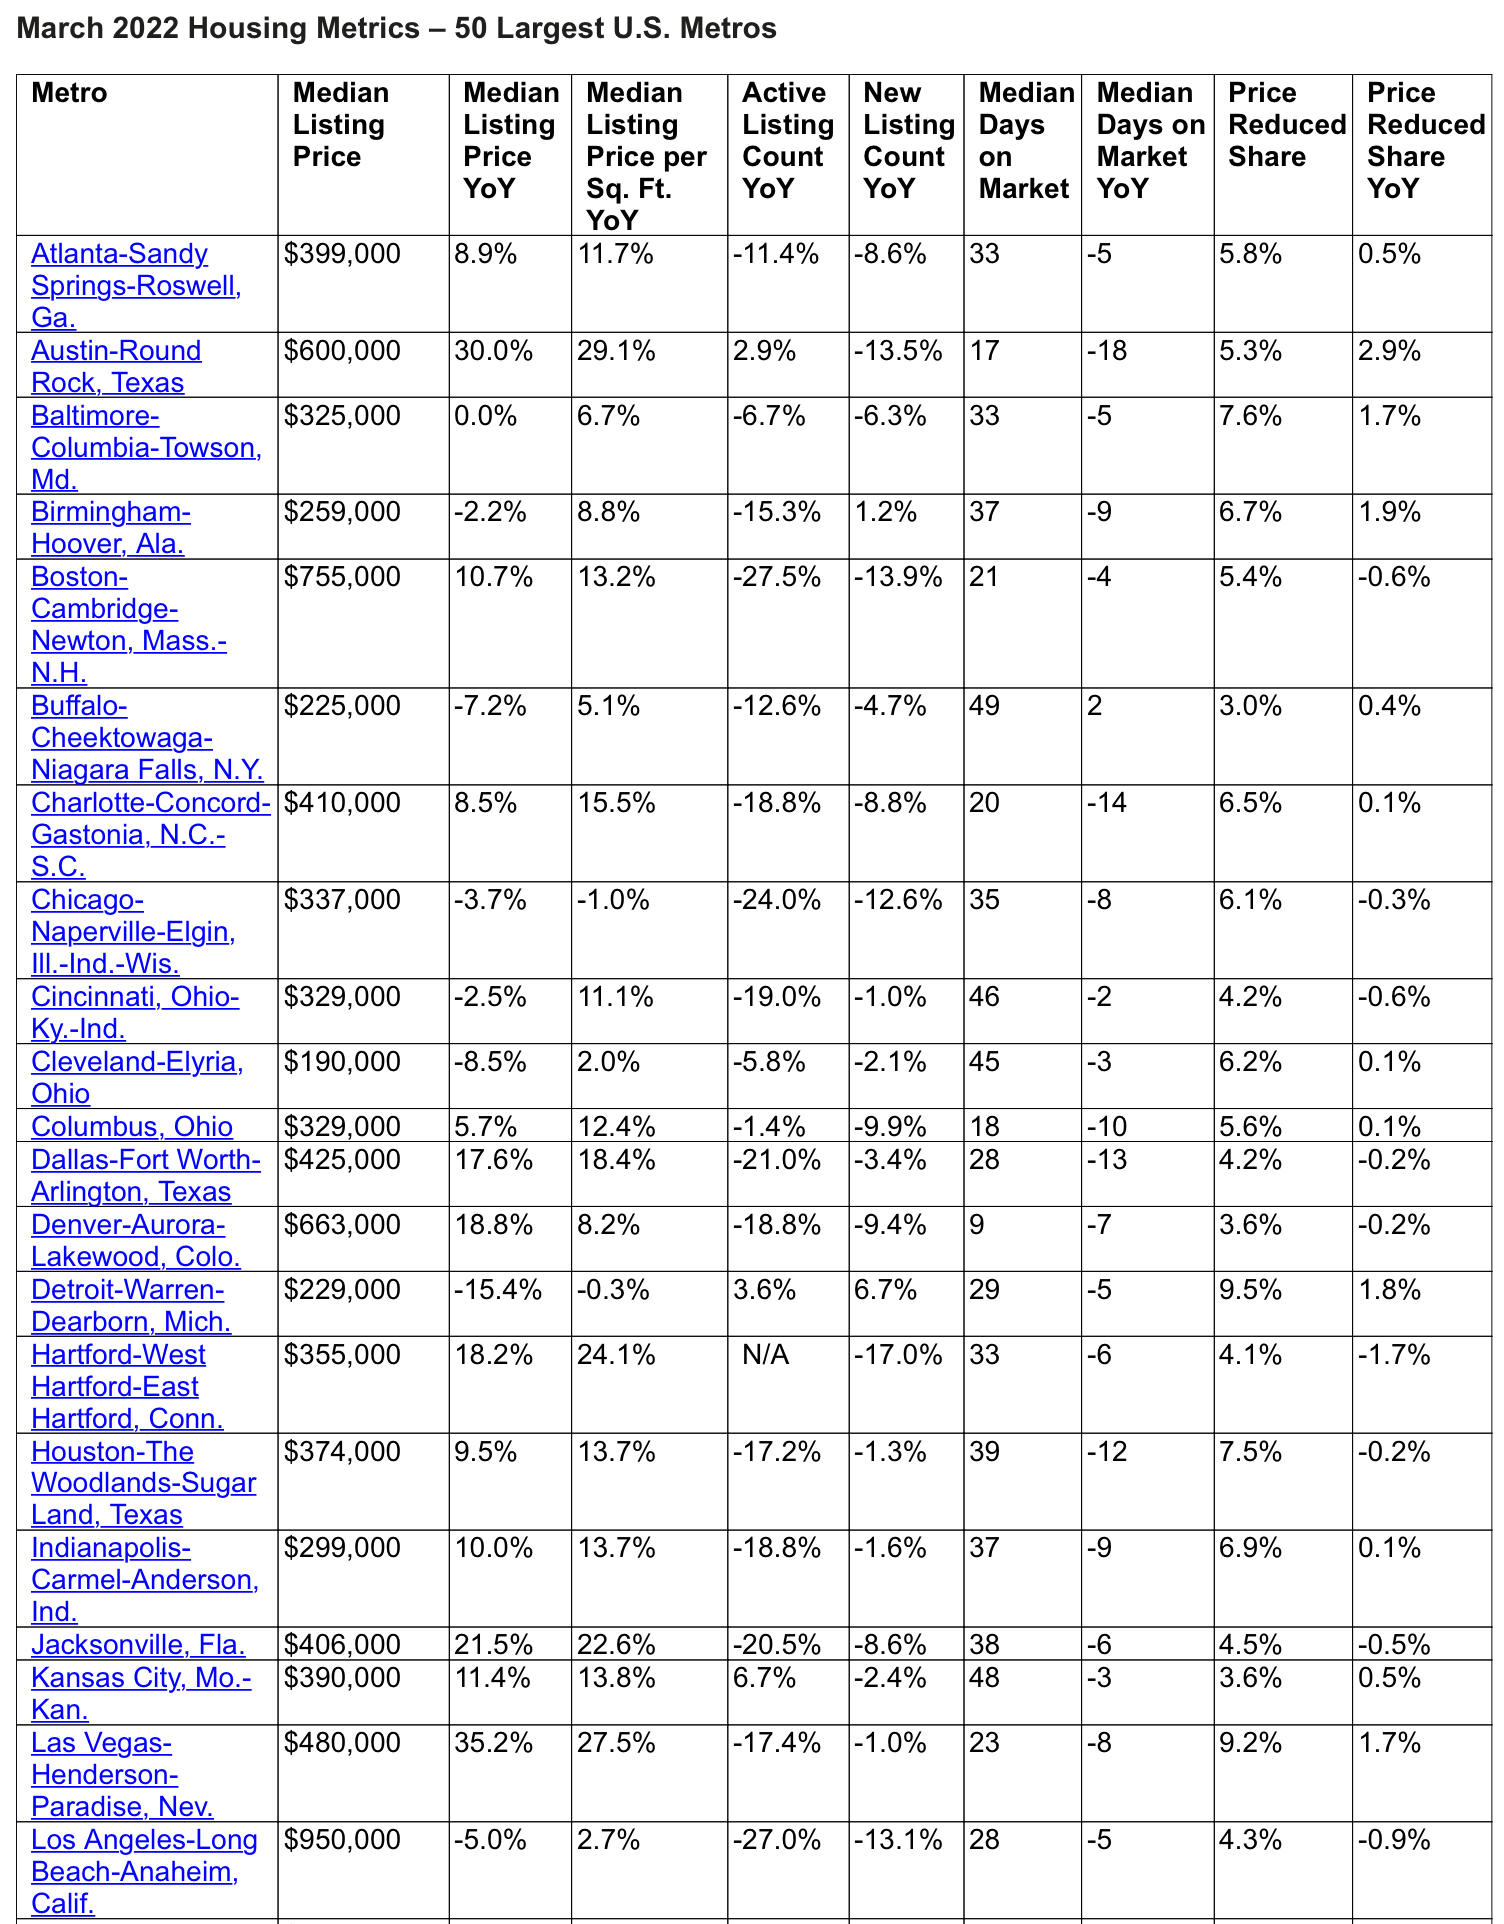 A table showing median home prices for the 50 largest metros in the U.S.